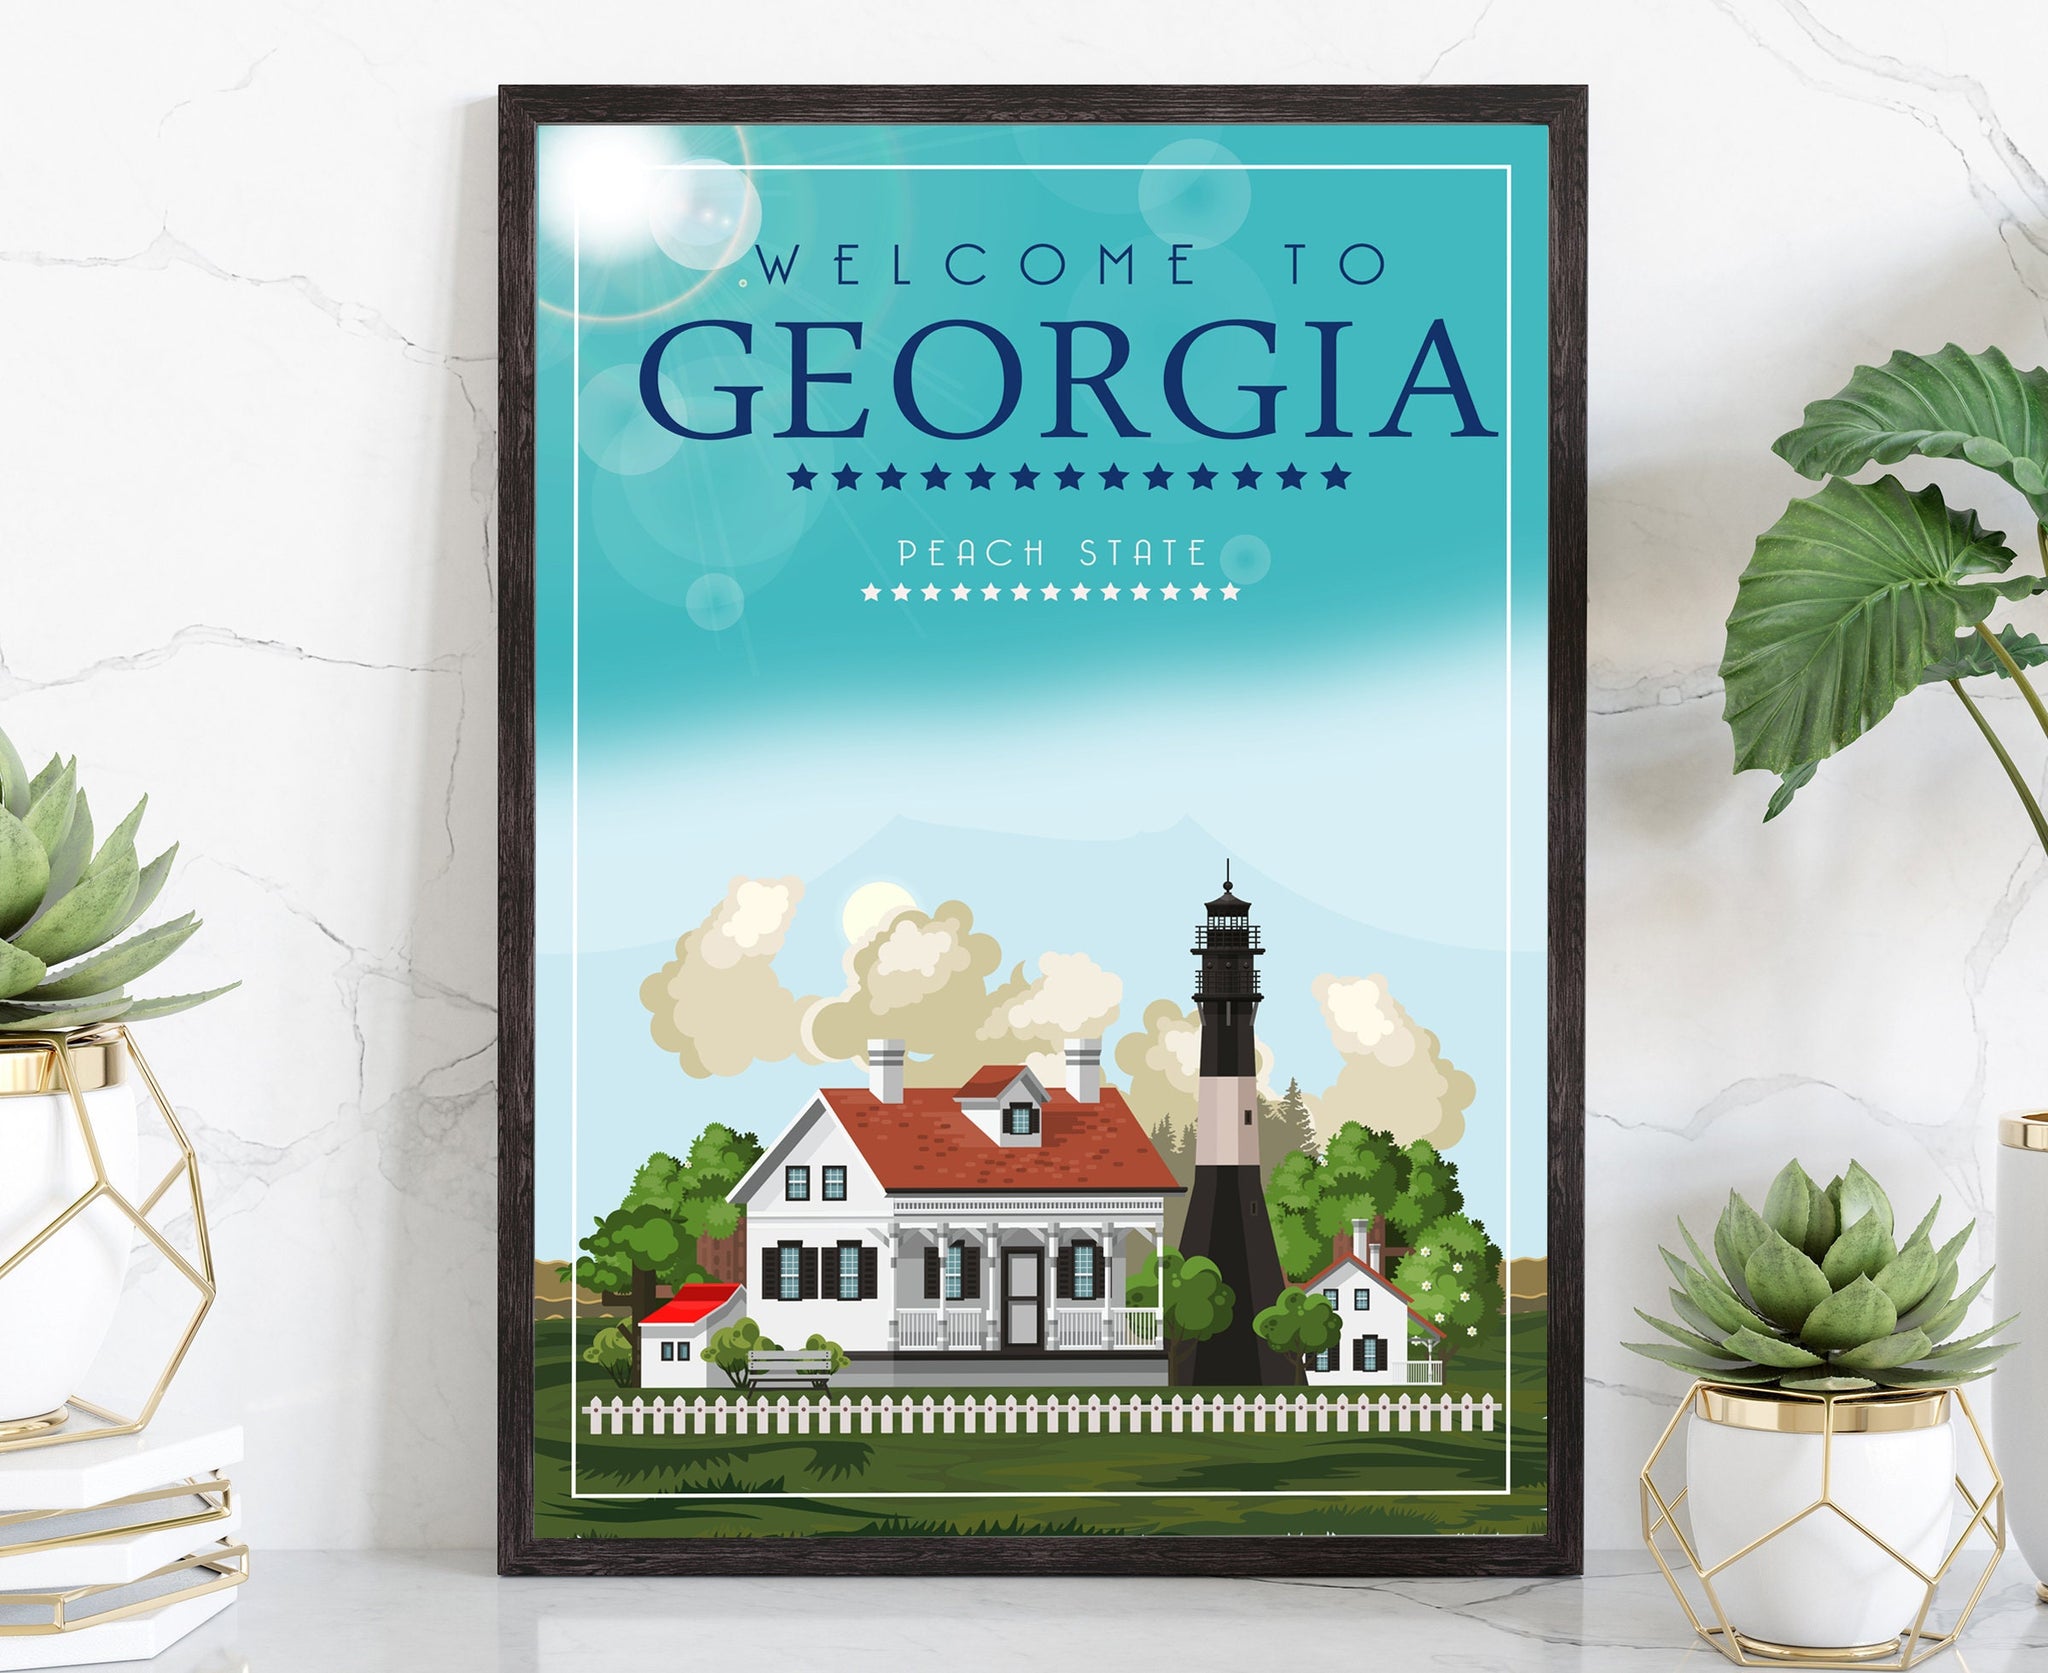 Retro Style Travel Poster, Georgia Vintage Rustic Poster Print, Home Wall Art, Office Wall Decor, Posters, Georgia, State Map Poster Prints